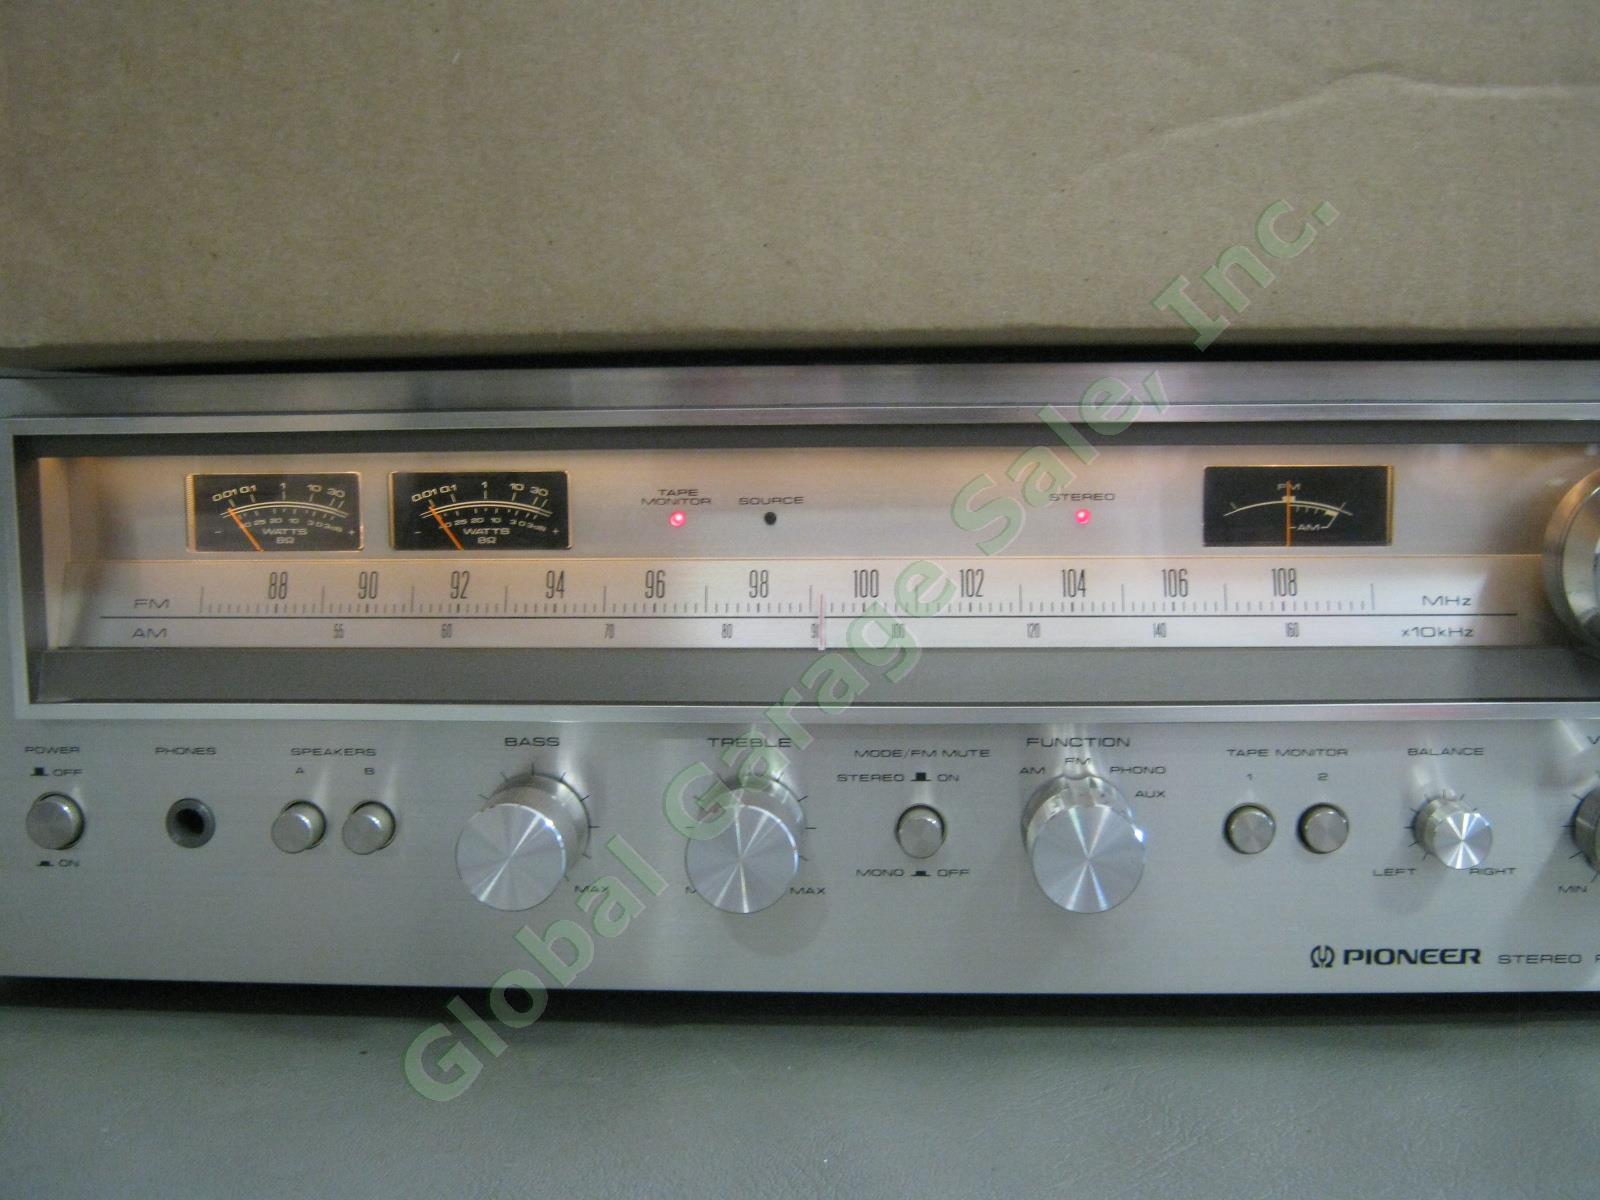 Vtg Pioneer SX-680 Solid State AM/FM Stereo Receiver + Wood Cabinet Clean Tested 1